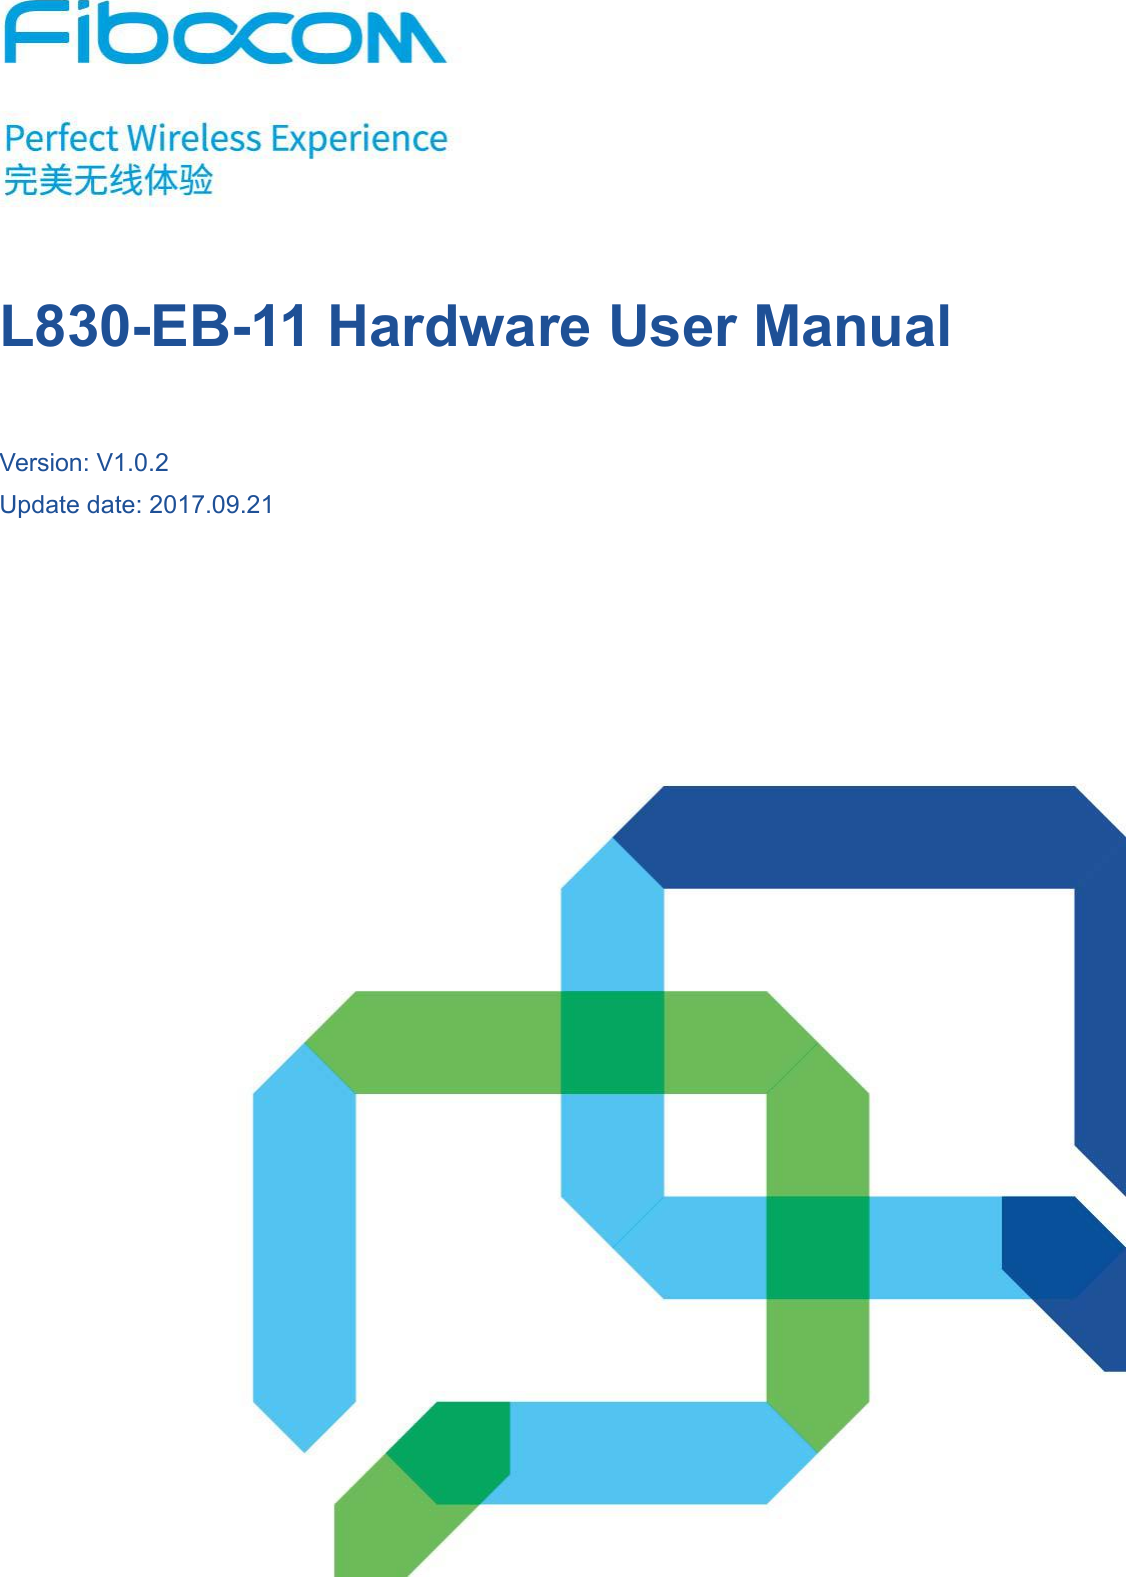 Reproduction forbidden without Fibocom Wireless Inc. written authorization - All Rights Reserved.L830-EBHardware User Manual Page1of39L830-EB-11 Hardware User ManualVersion: V1.0.2Update date: 2017.09.21